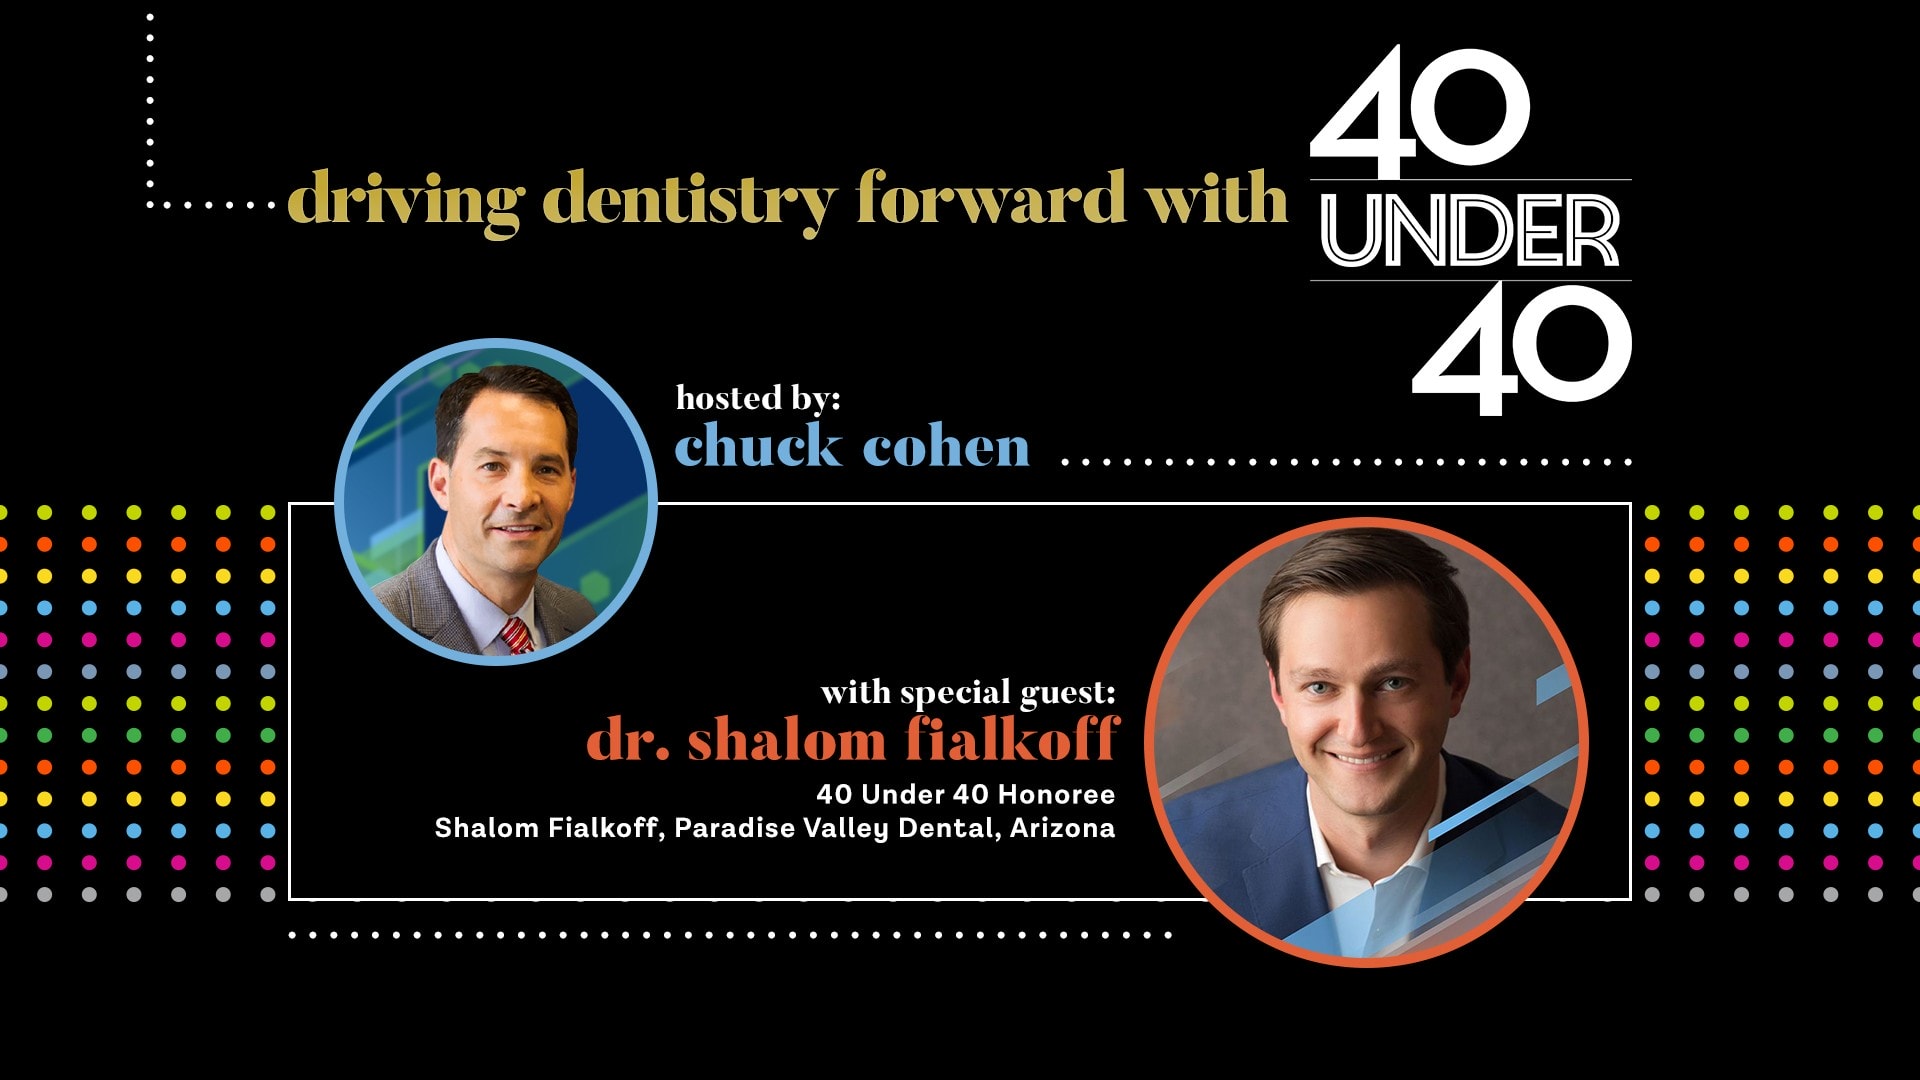 Is it possible to simultaneously earn a dental degree and a Master of Public Health degree? Dr. Shalom Fialkoff answers that and more in today’s #drivingdentistryforward podcast